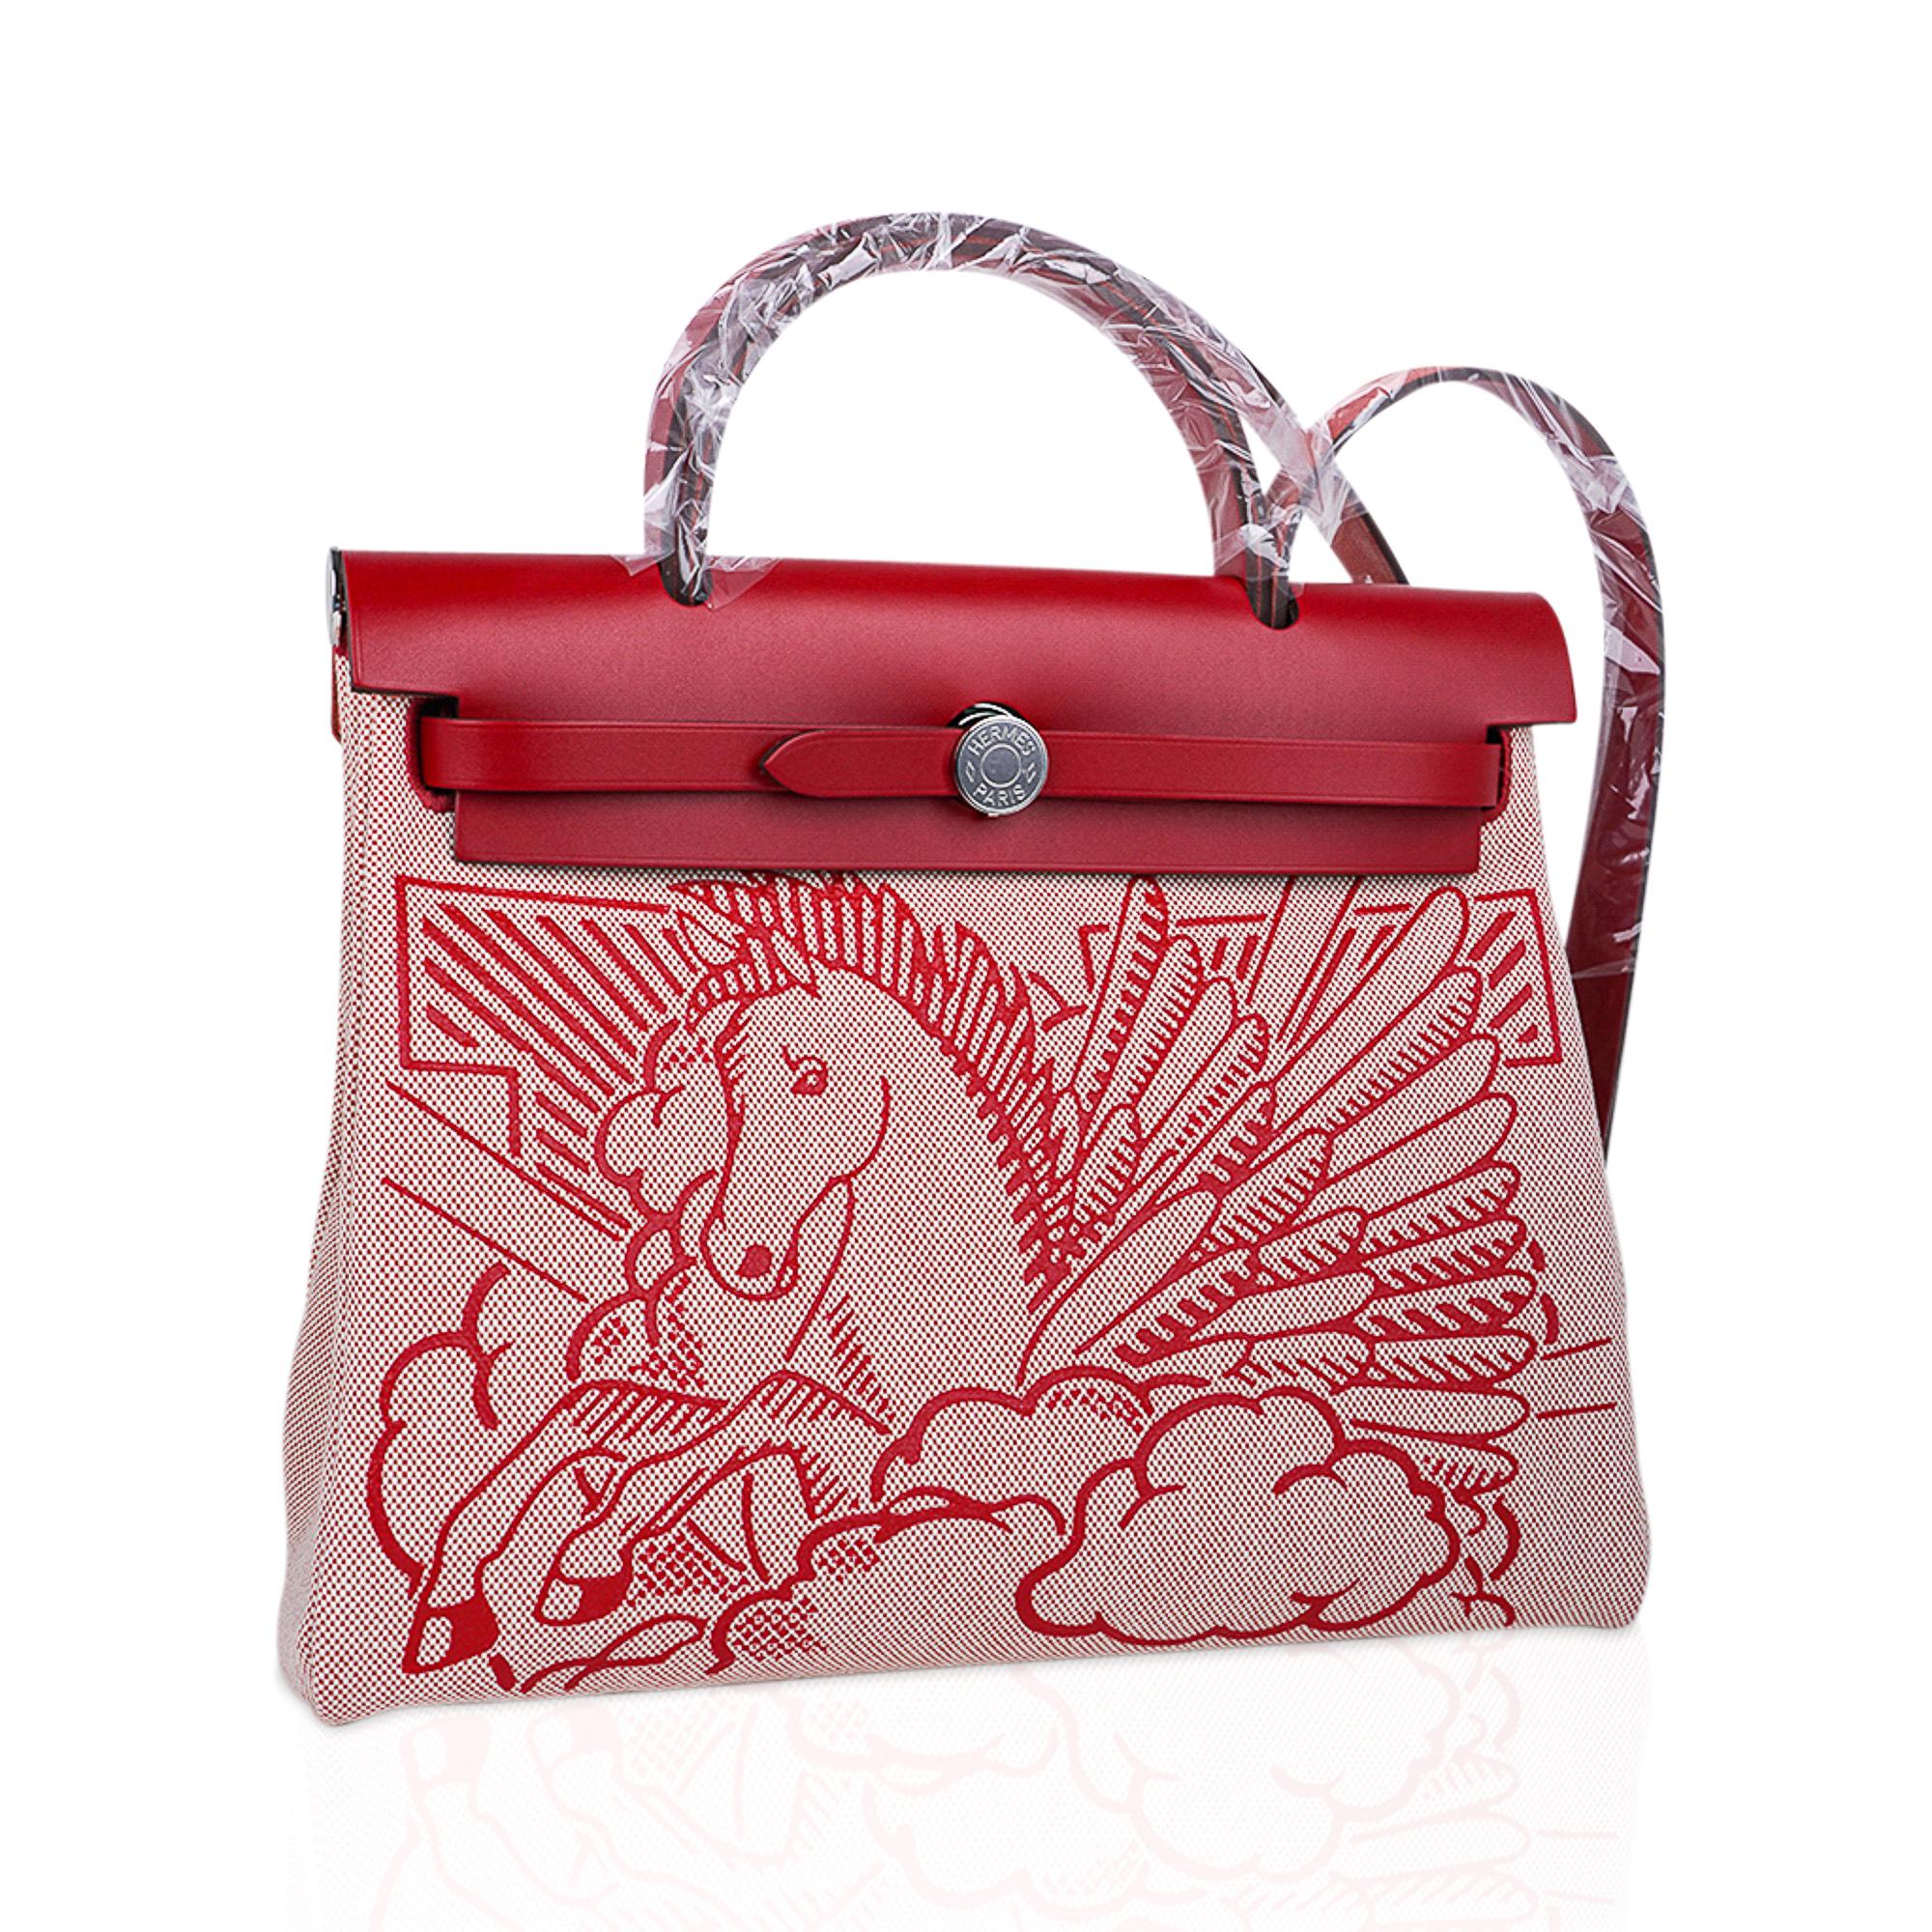 Mightychic offers an Hermes Herbag Zip 31 Pegase featured Toile and Rouge Piment Vache Hunter leather.
Splashed on the front of the bag is a Pegasus Pop.
Rear has an exterior toile canvas zip pocket.
Interior is matching toile to the exterior pocket